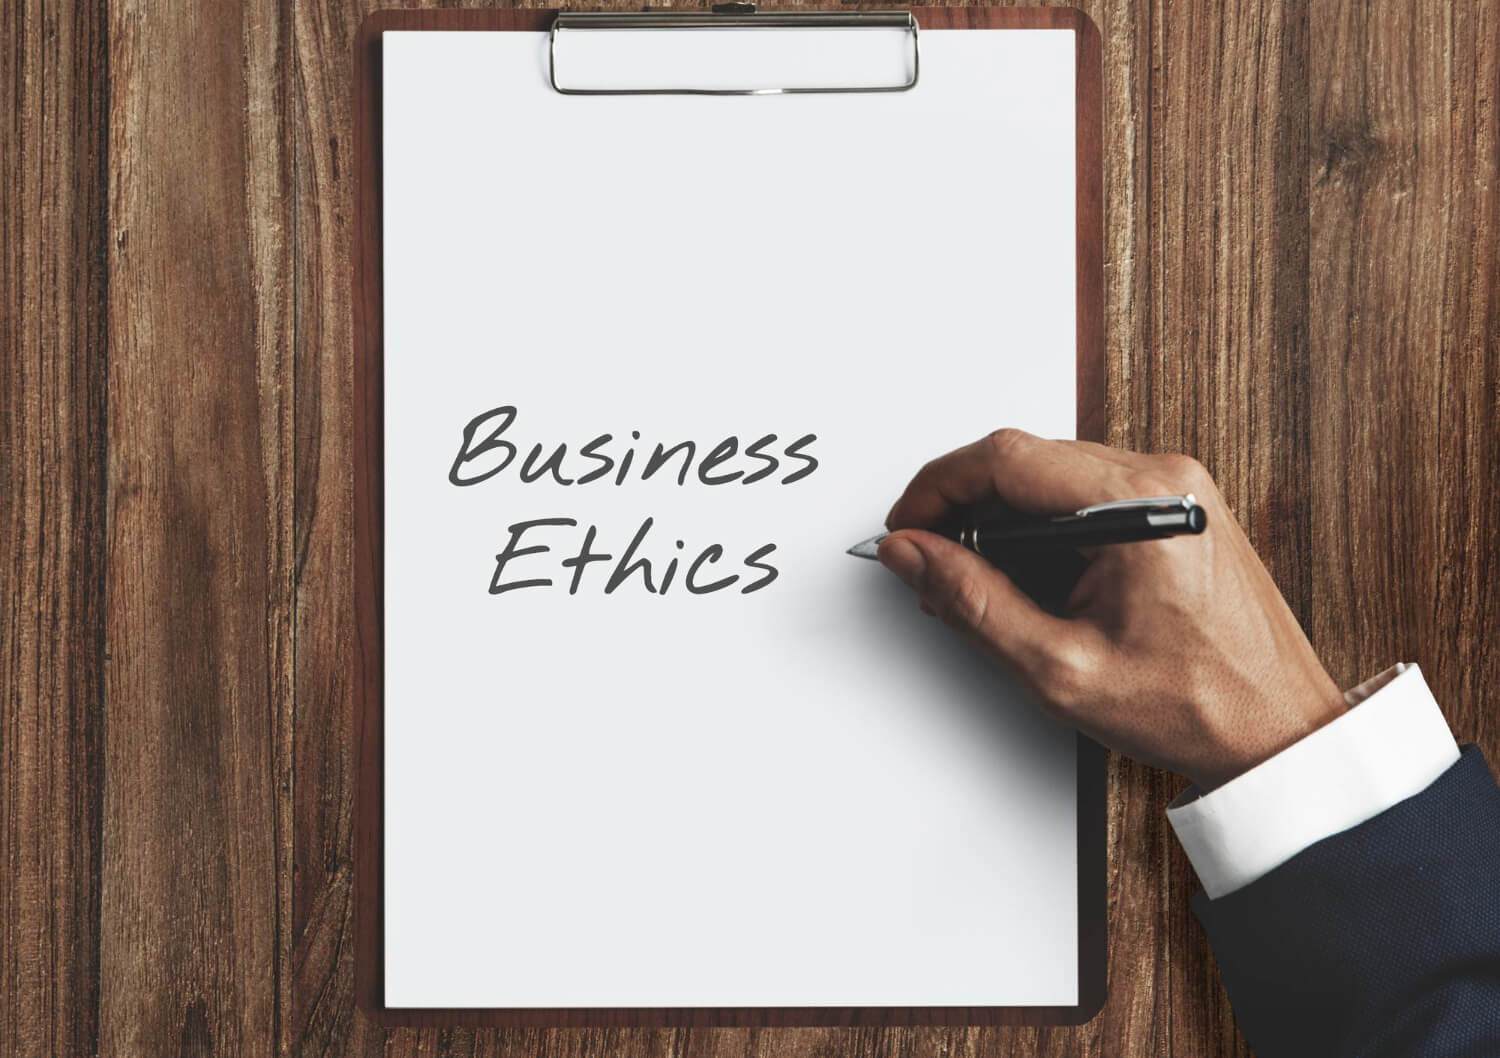 Business ethics written on a note